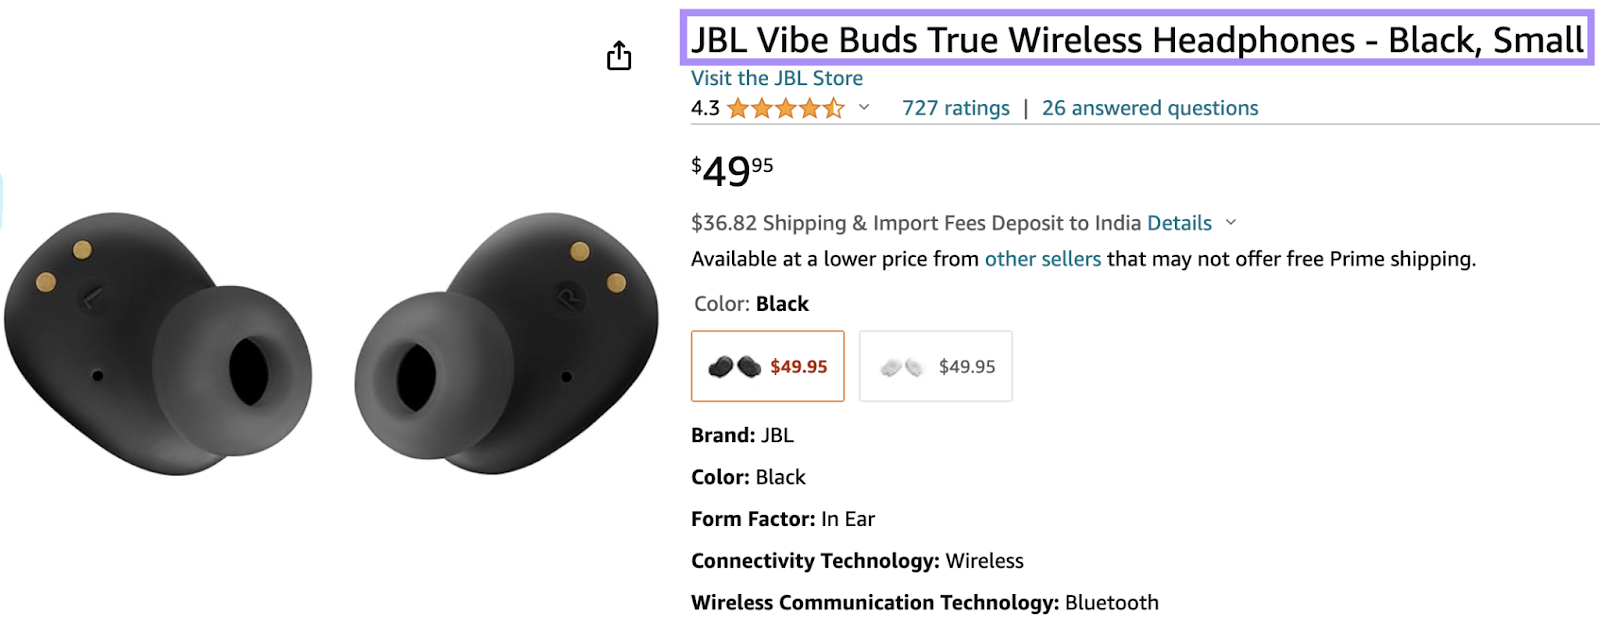 An example of a product title for wireless headphones on Amazon